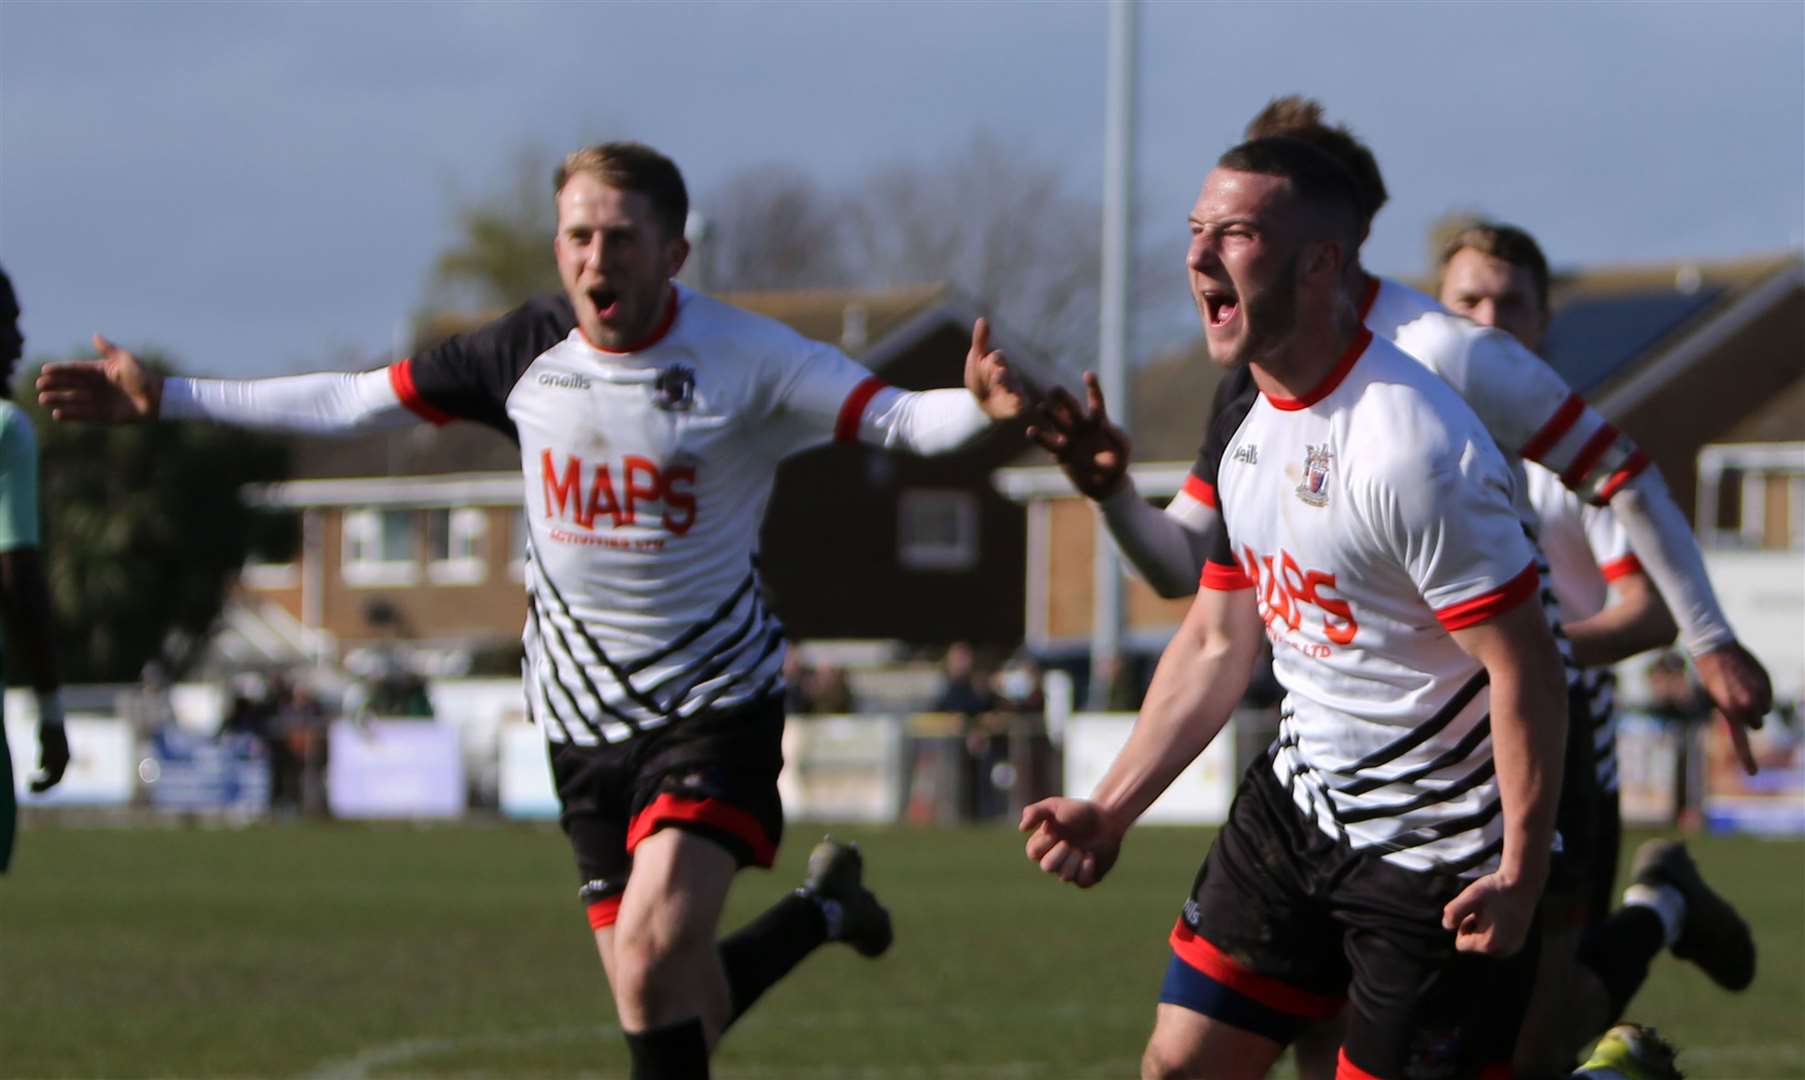 Lenny Atherton celebrates his late winner on Easter Monday in Deal's 2-1 win over Welling Town. Picture: Paul Willmott